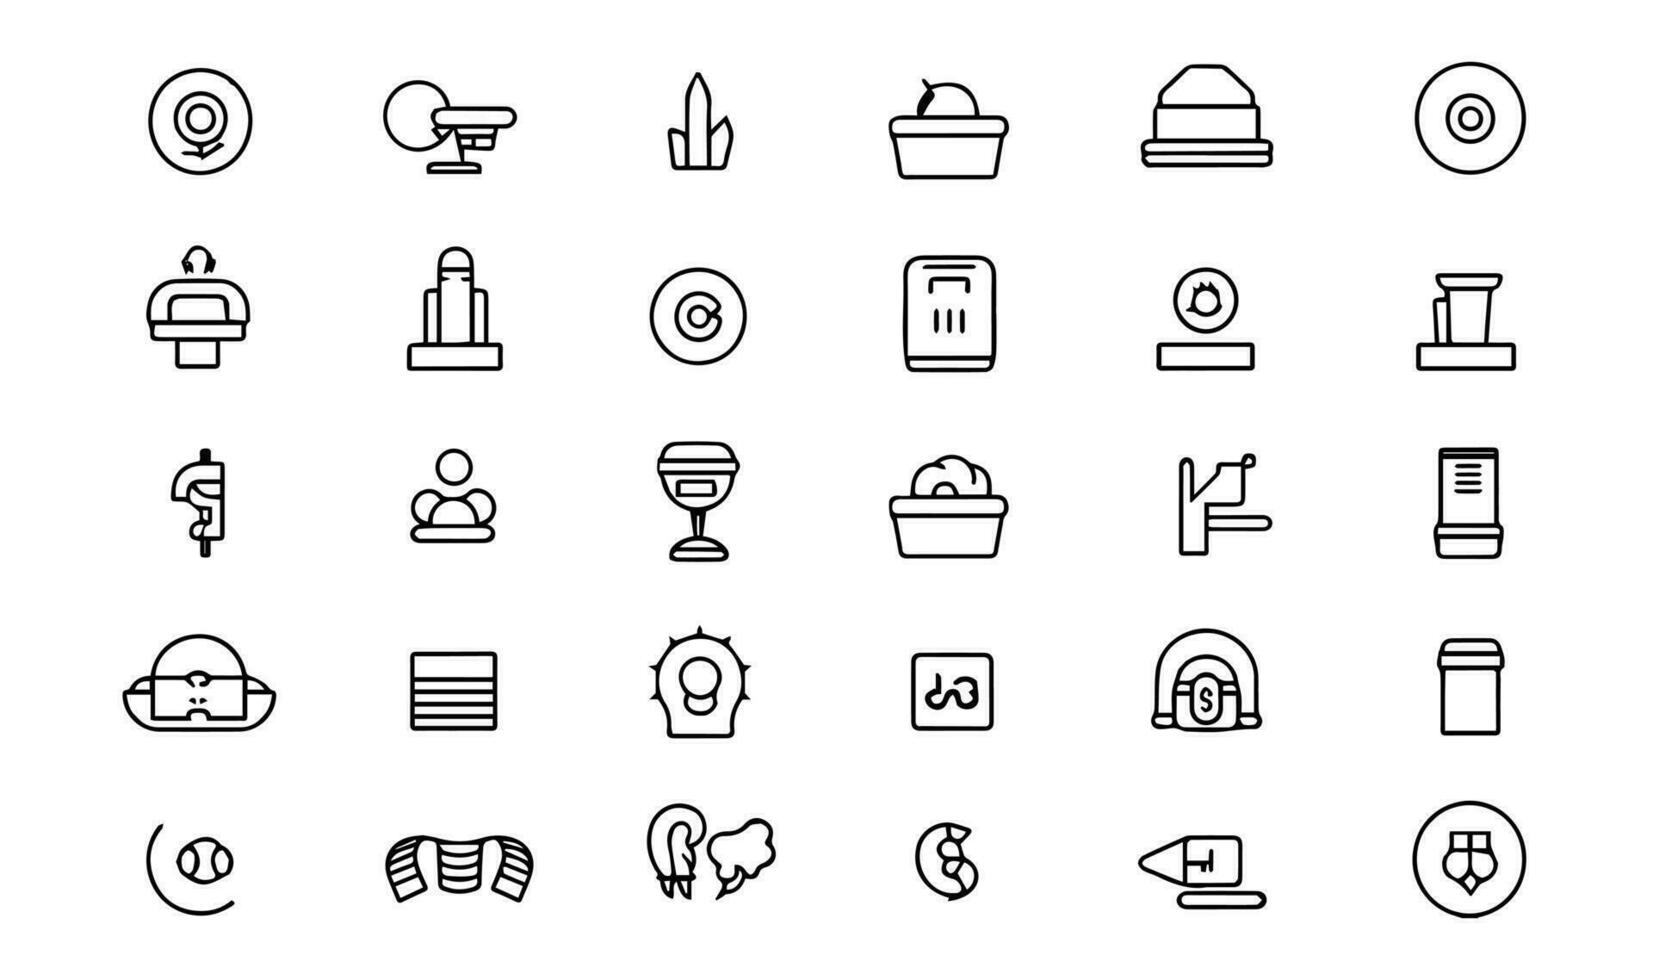 Set of simple black and white icons on the theme of finance. vector